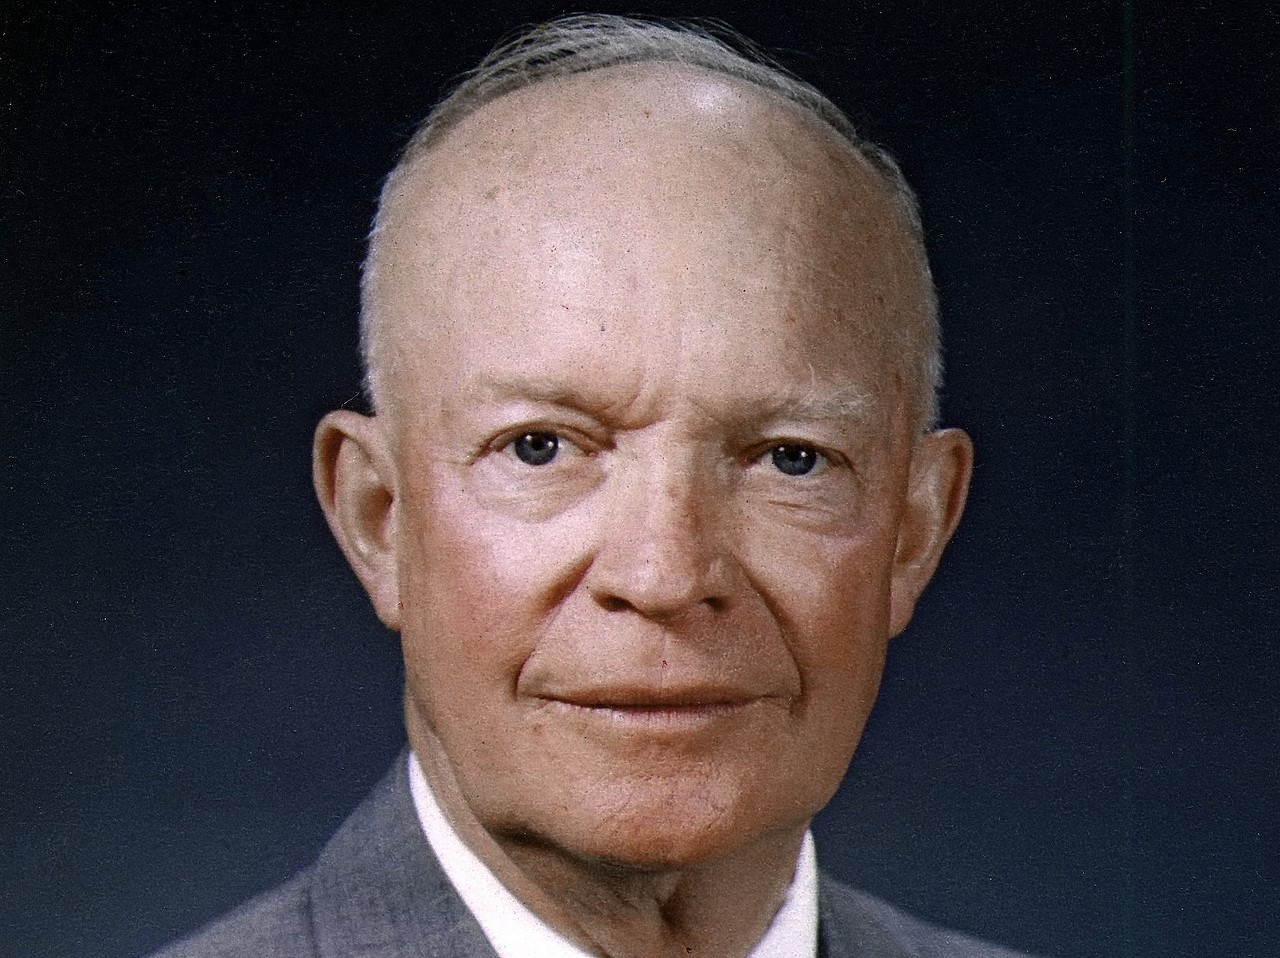 Dwight D. Eisenhower
Dwight D. Eisenhower, the nation’s 34th president, was stationed at Fort Sam Houston in 1916. He also coached a football team at St. Louis College, which is now St. Mary's University.